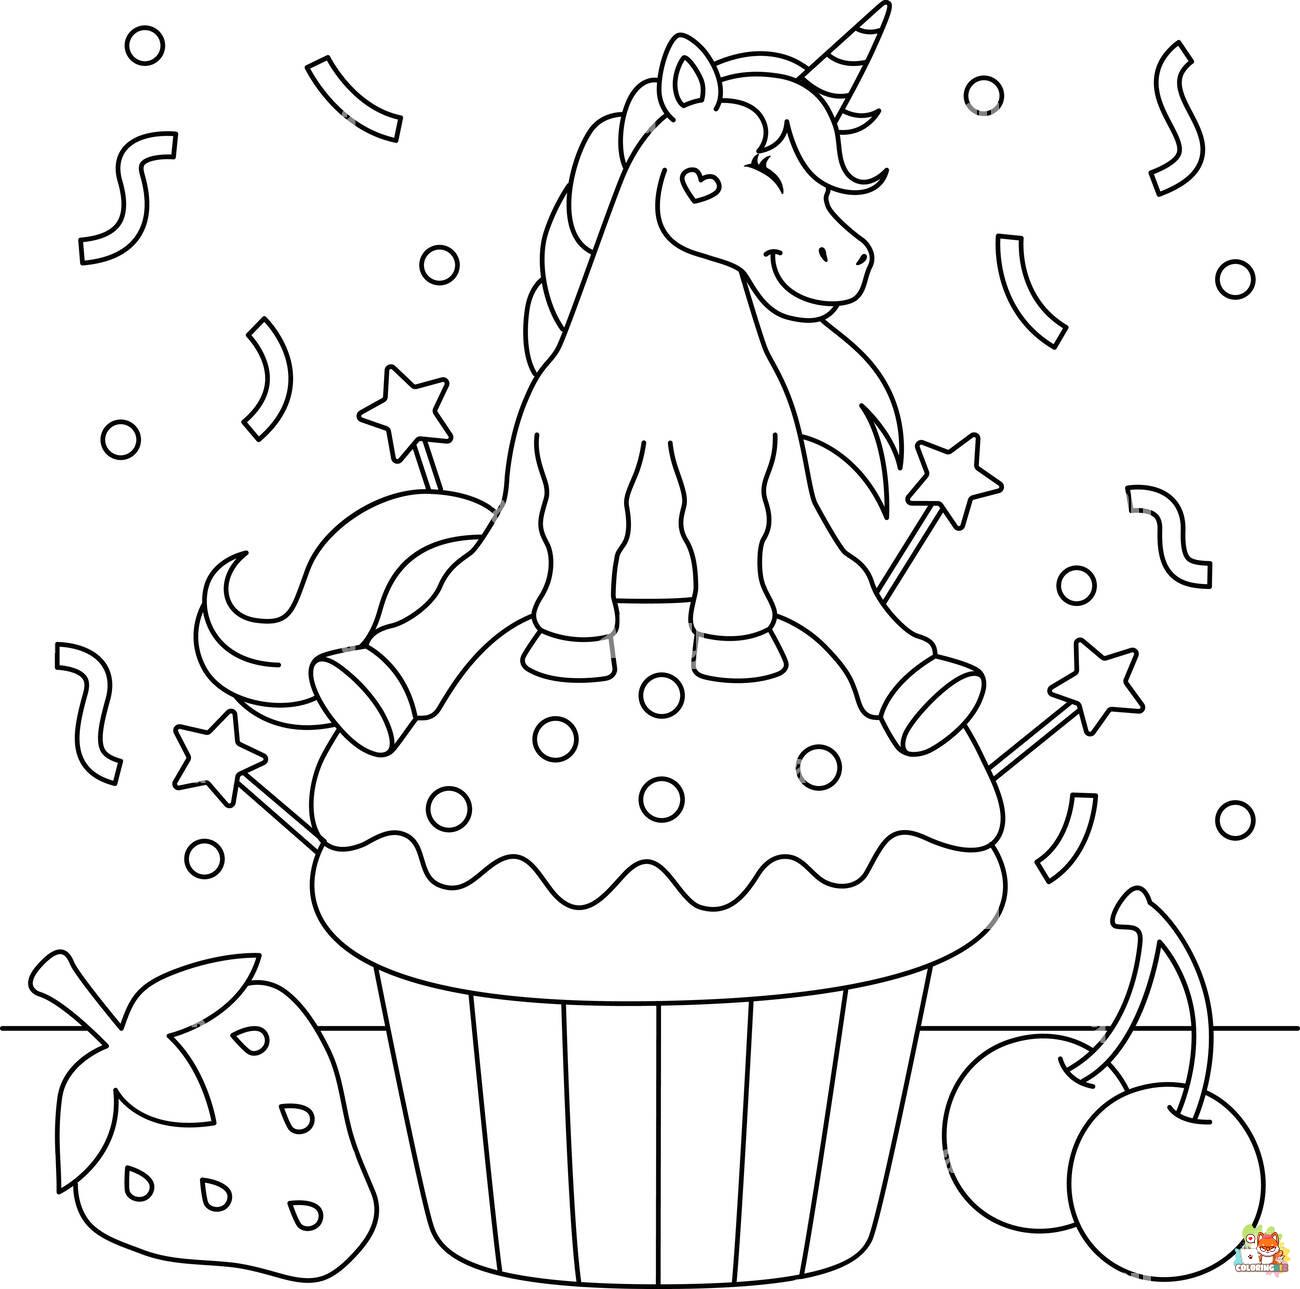 Unicorn Cake Coloring Pages 5